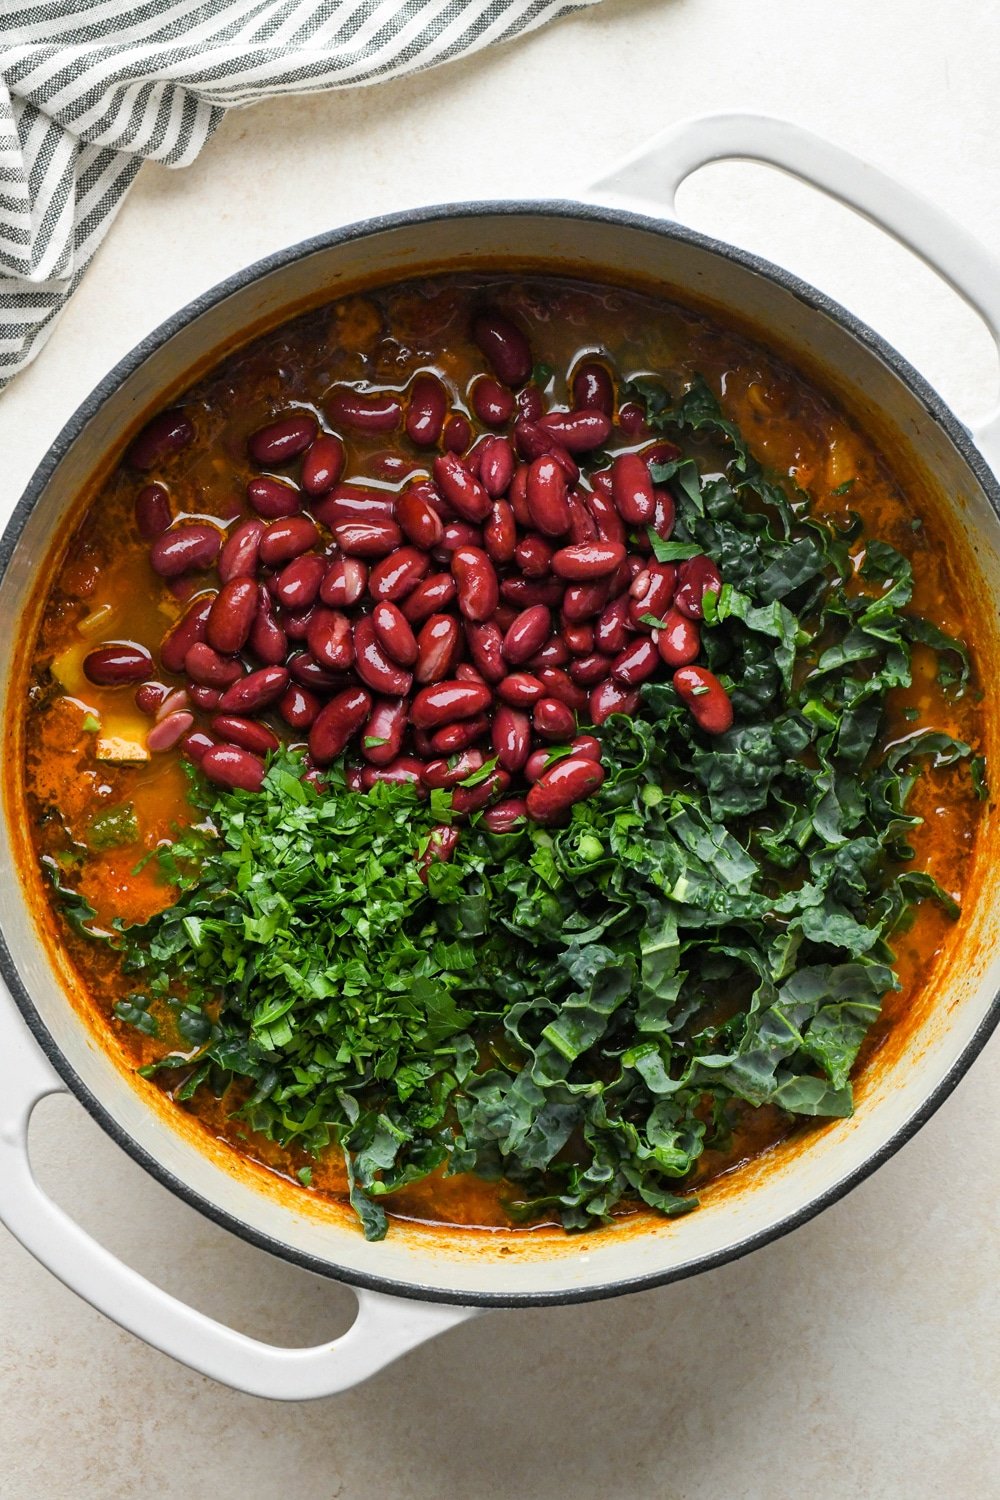 How to make Gluten Free Minestrone Soup: Kidney beans, chopped lacinato kale, and chopped fresh parsley added to the soup before cooking.